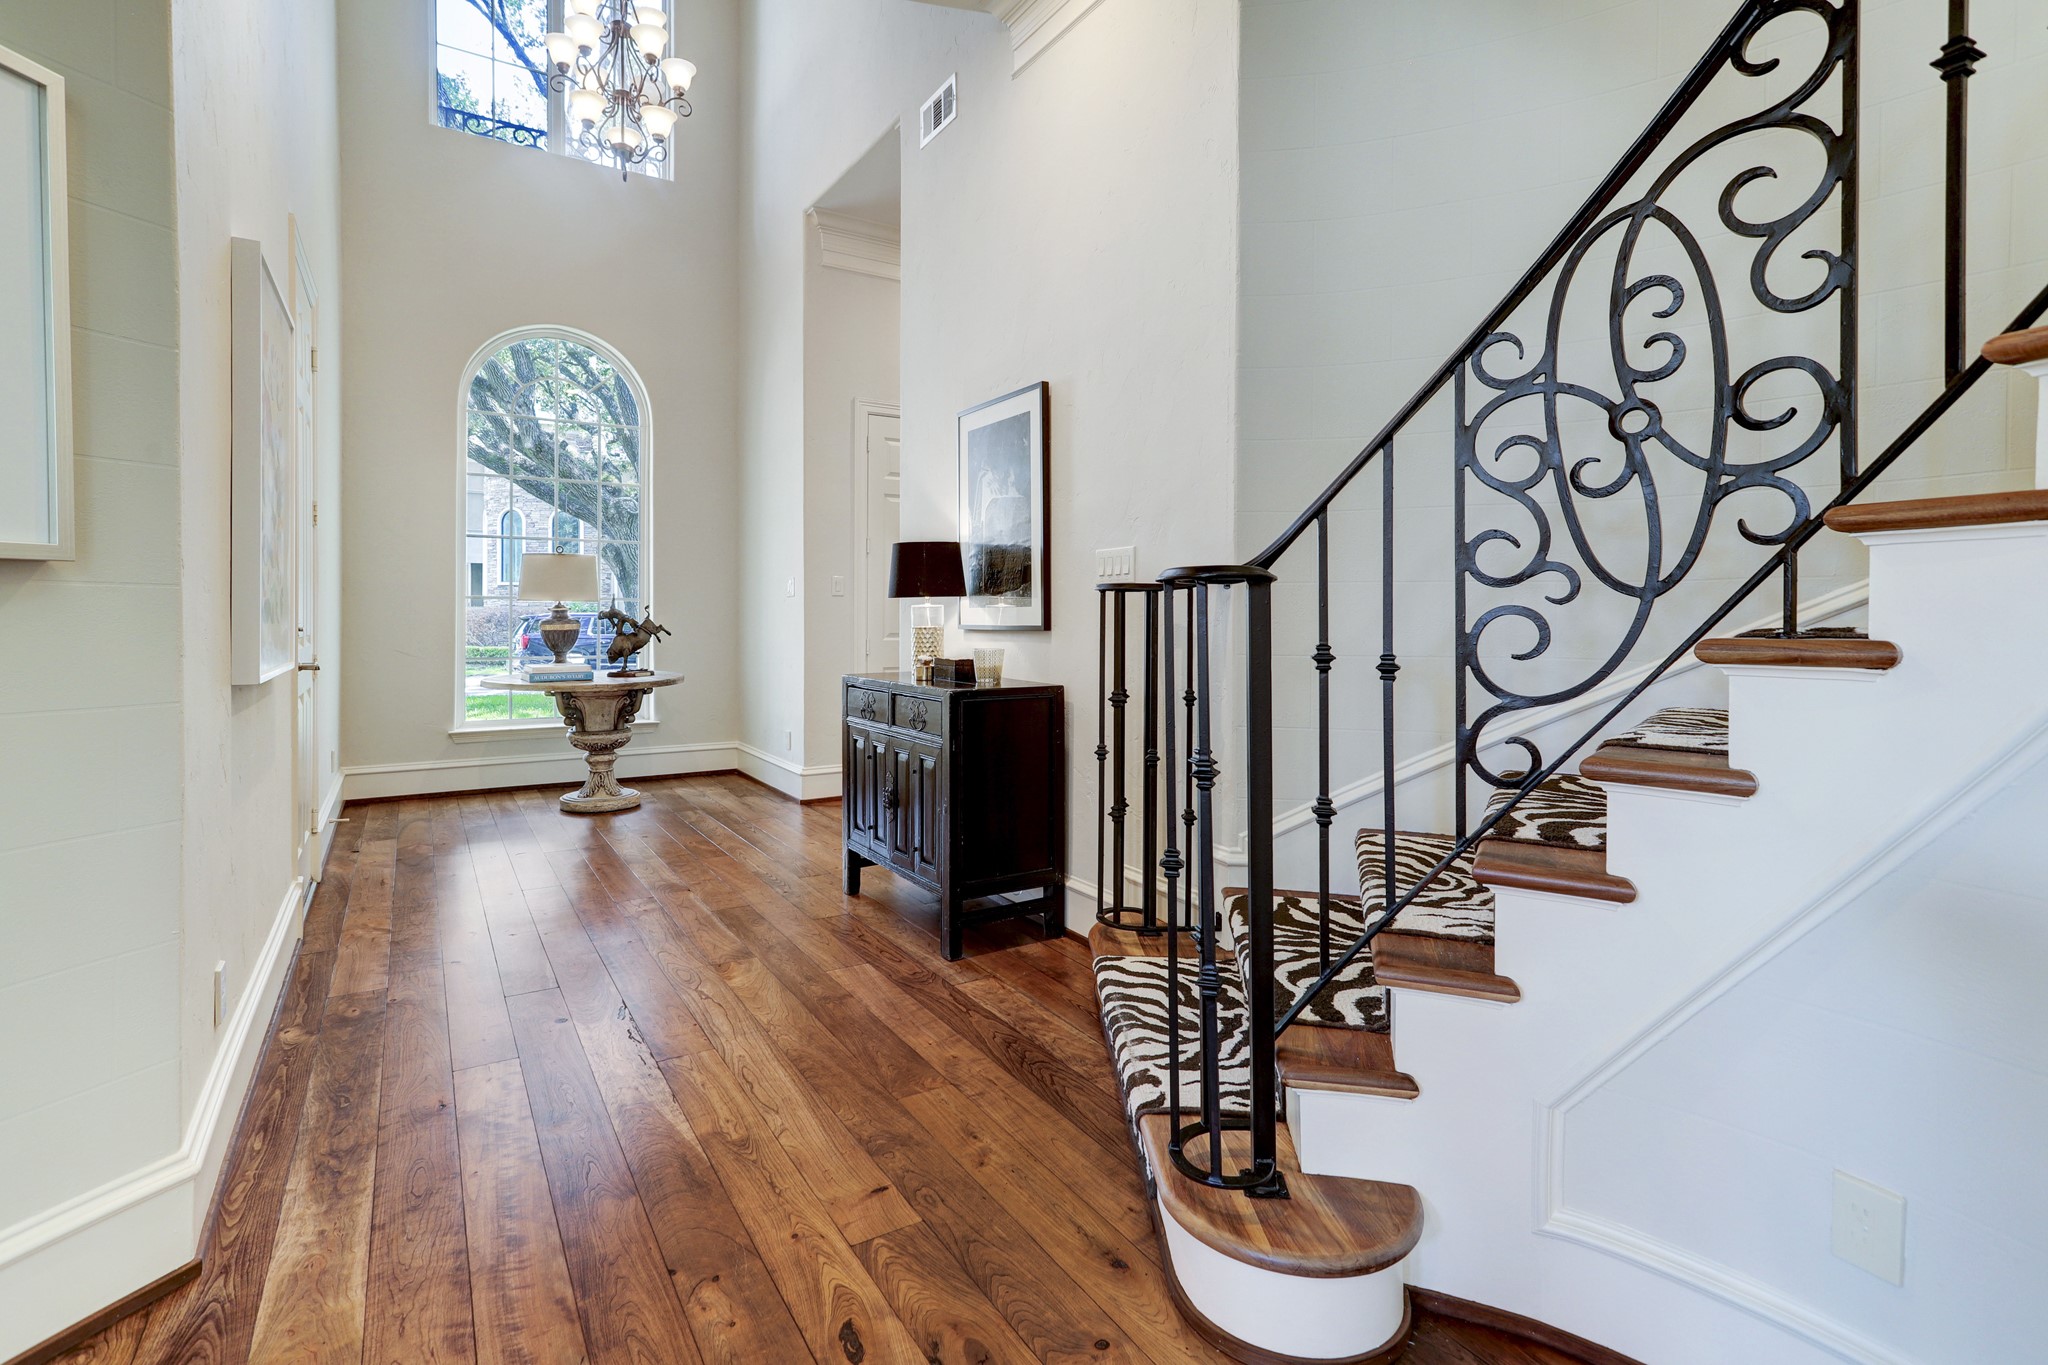 Another view of the beautiful designed metal raining staircase and hardwood flooring.